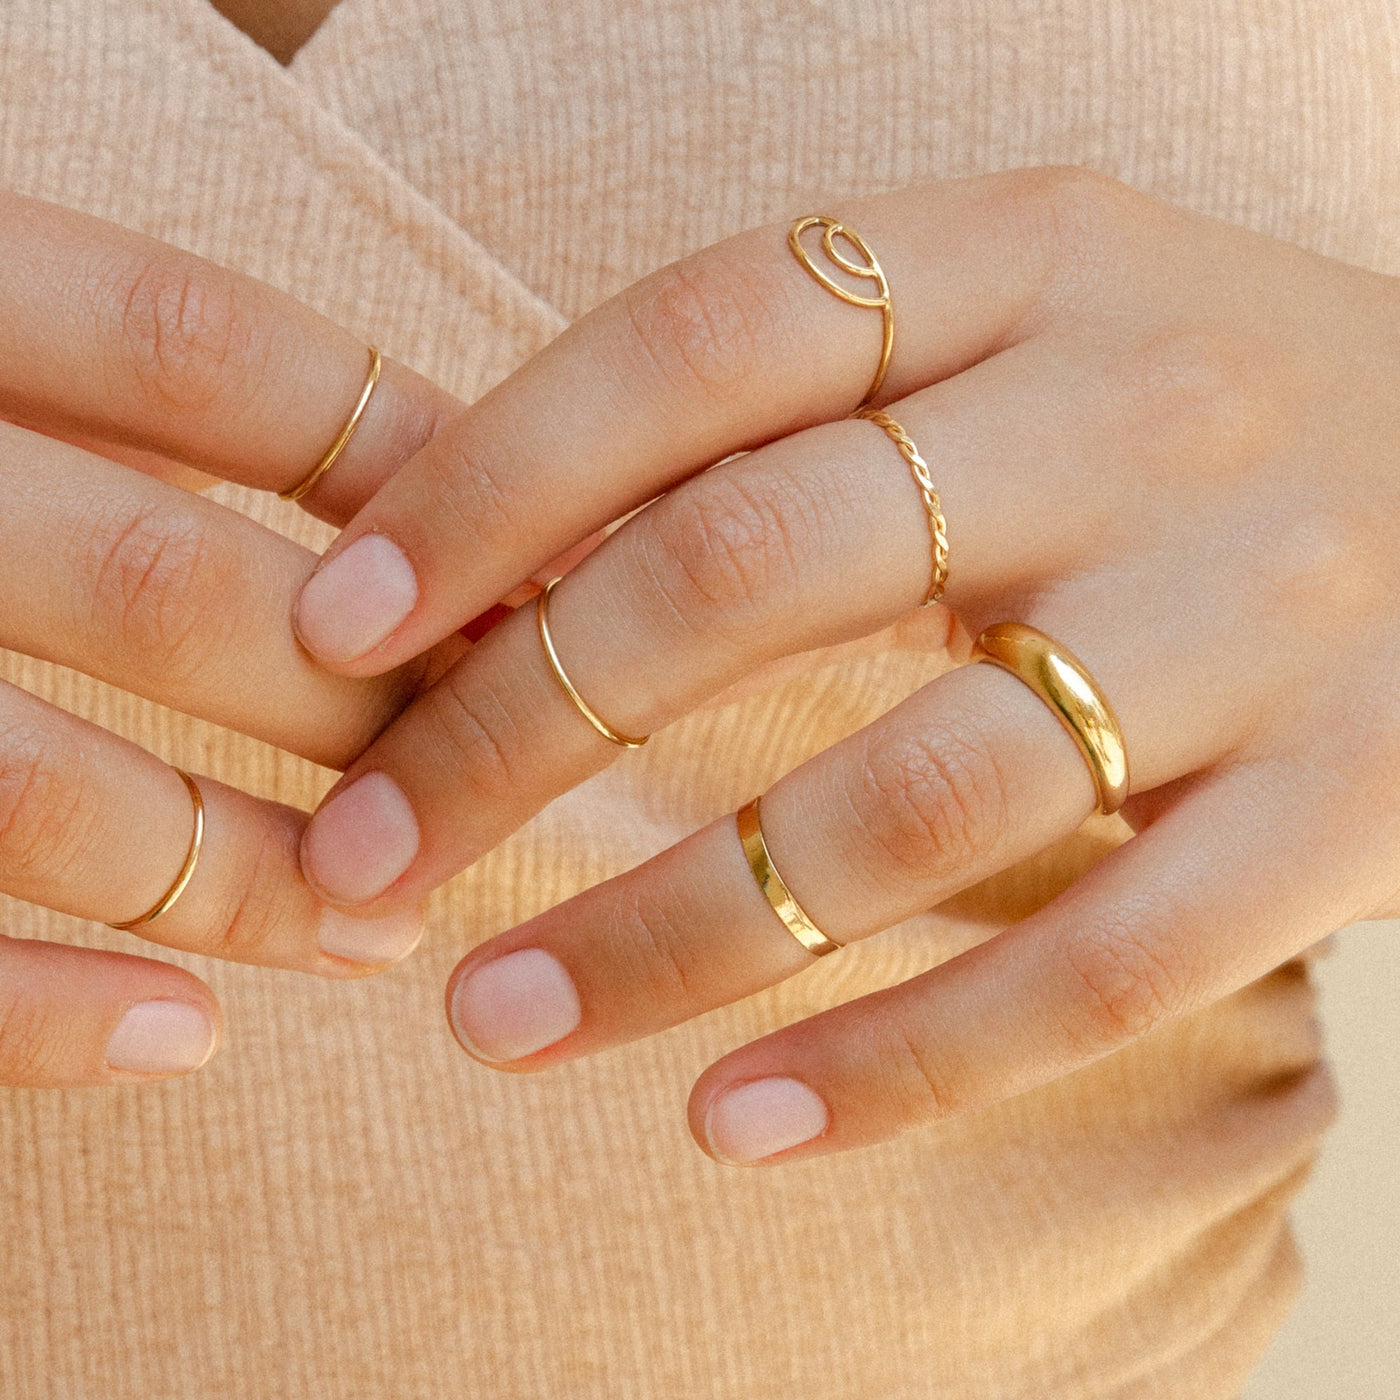 Simple Stacking Ring | Simple & Dainty Jewelry